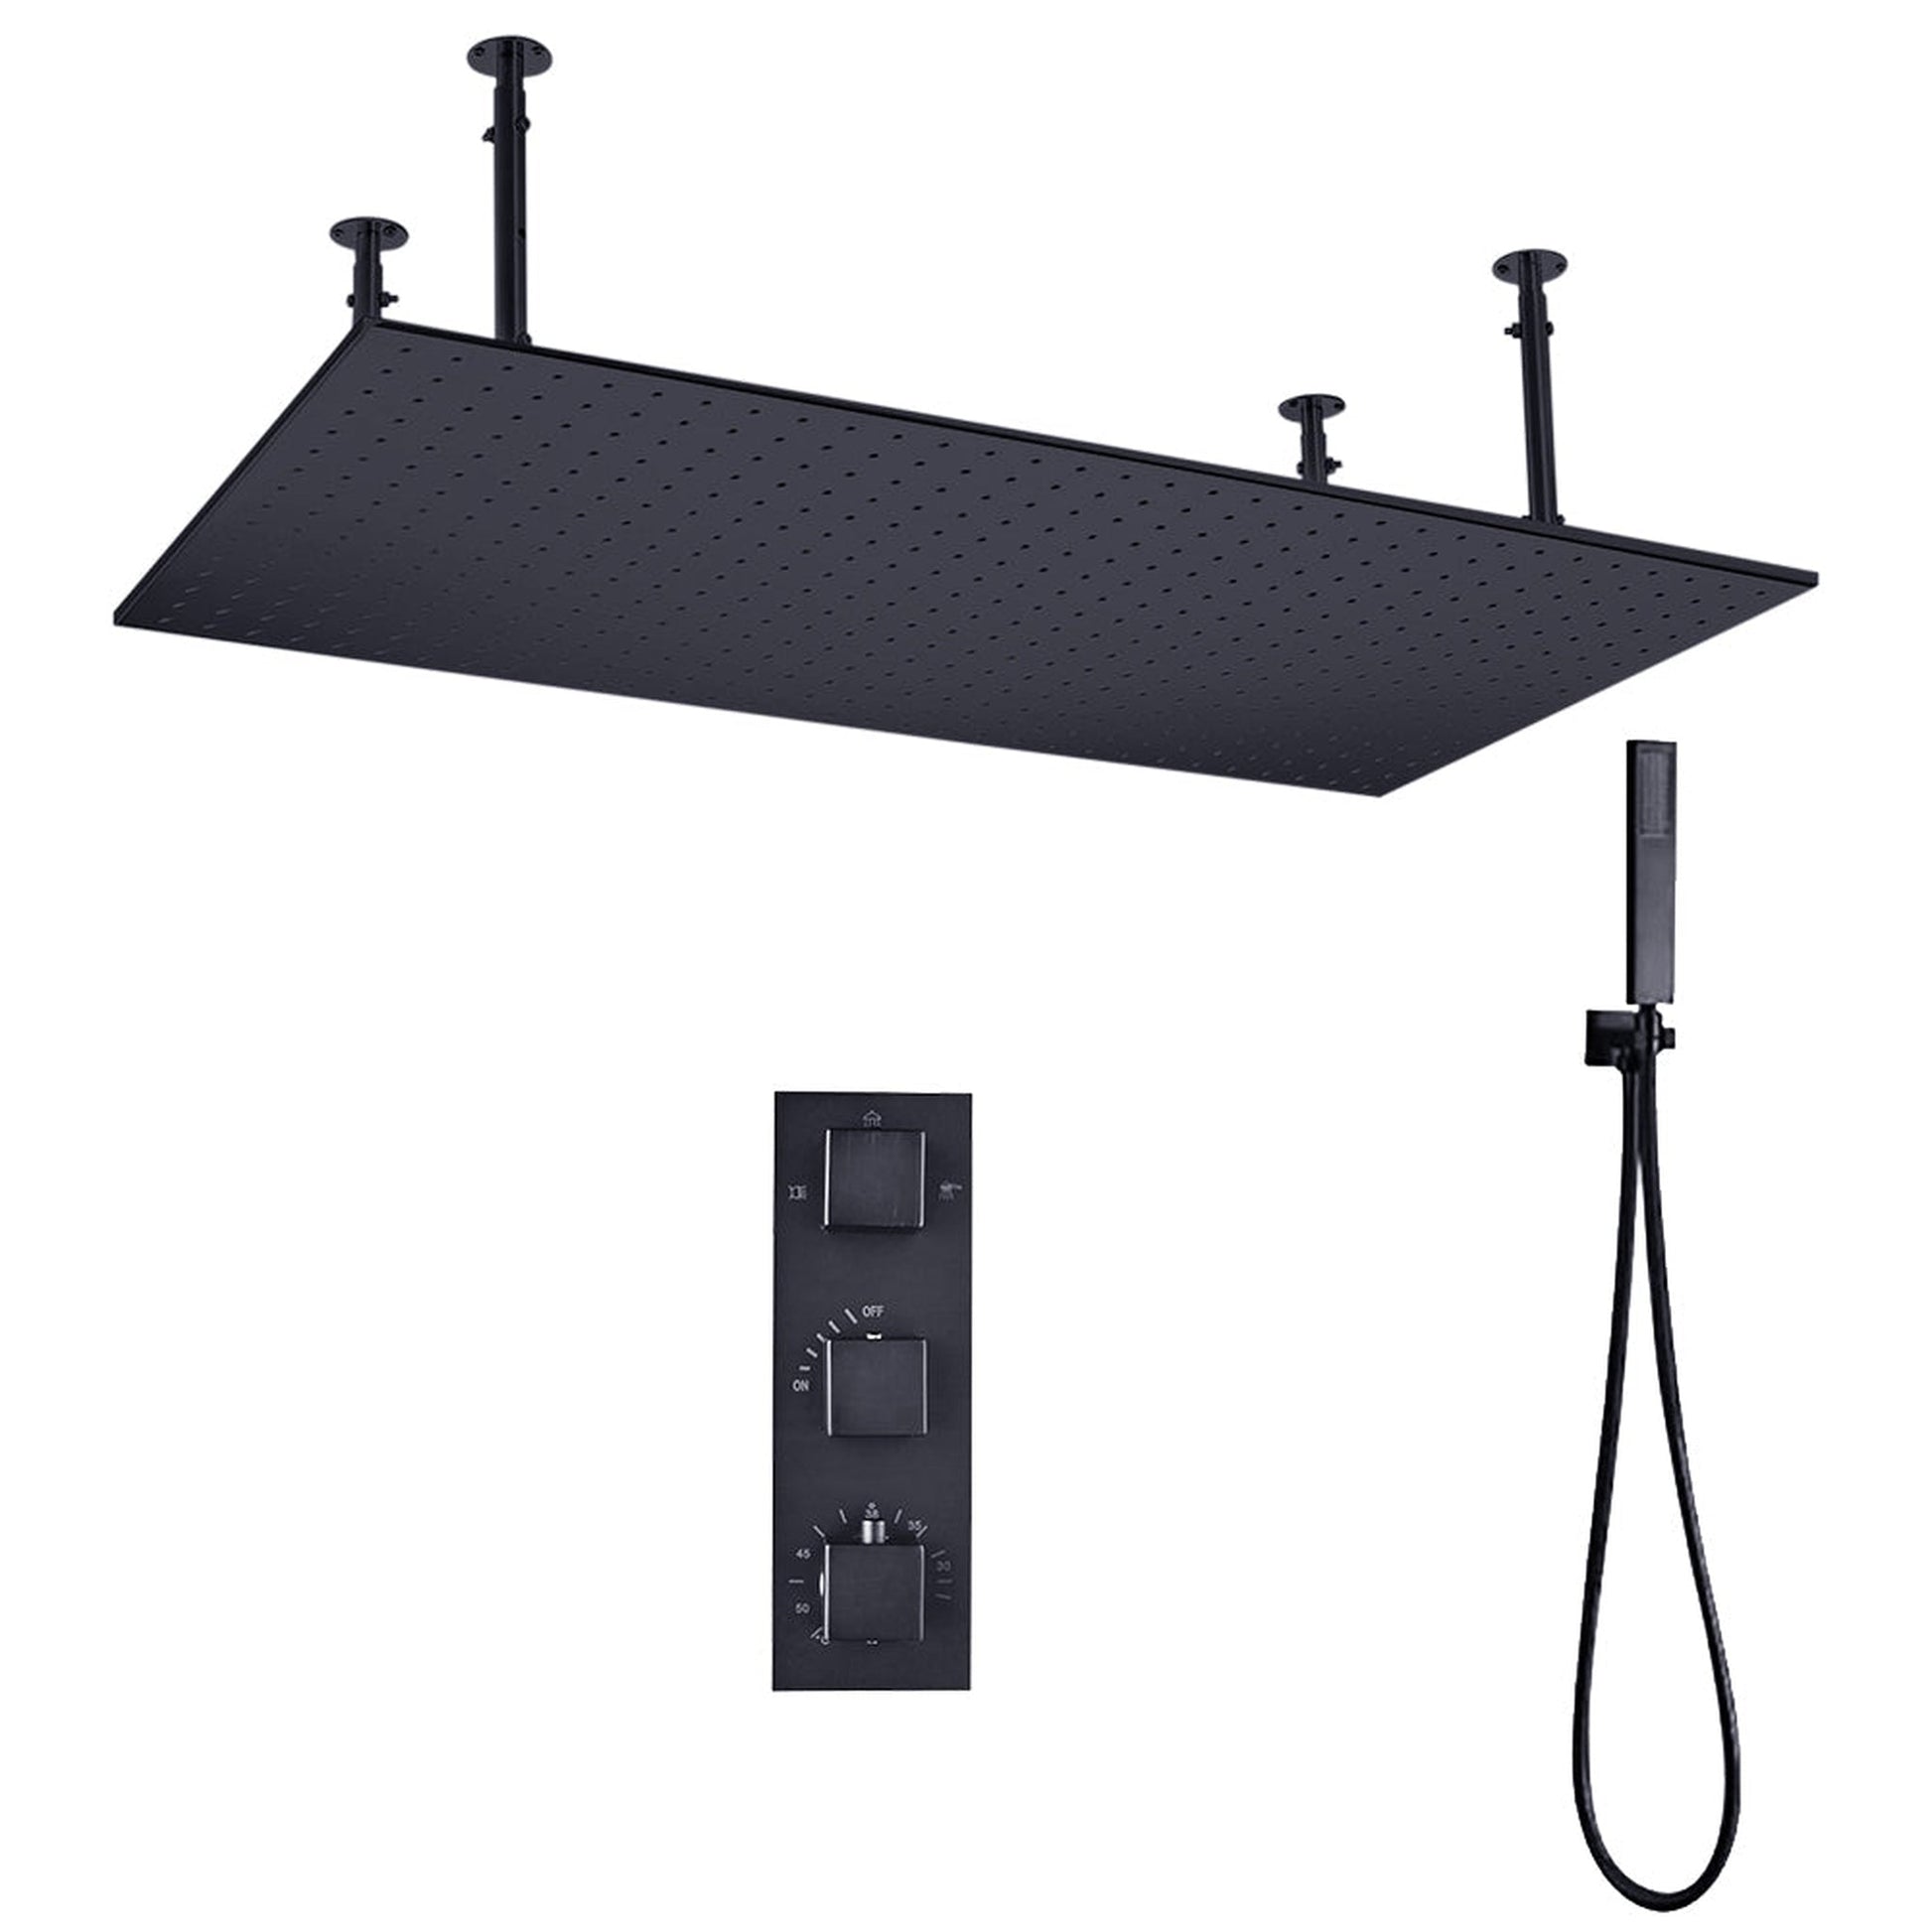 Matte Black Wall Mount 6inch Regular High Water Pressure Shower Head Ceiling Mount 16inch or 12 inch Rainfall Shower Head 3 Way Thermostatic Shower